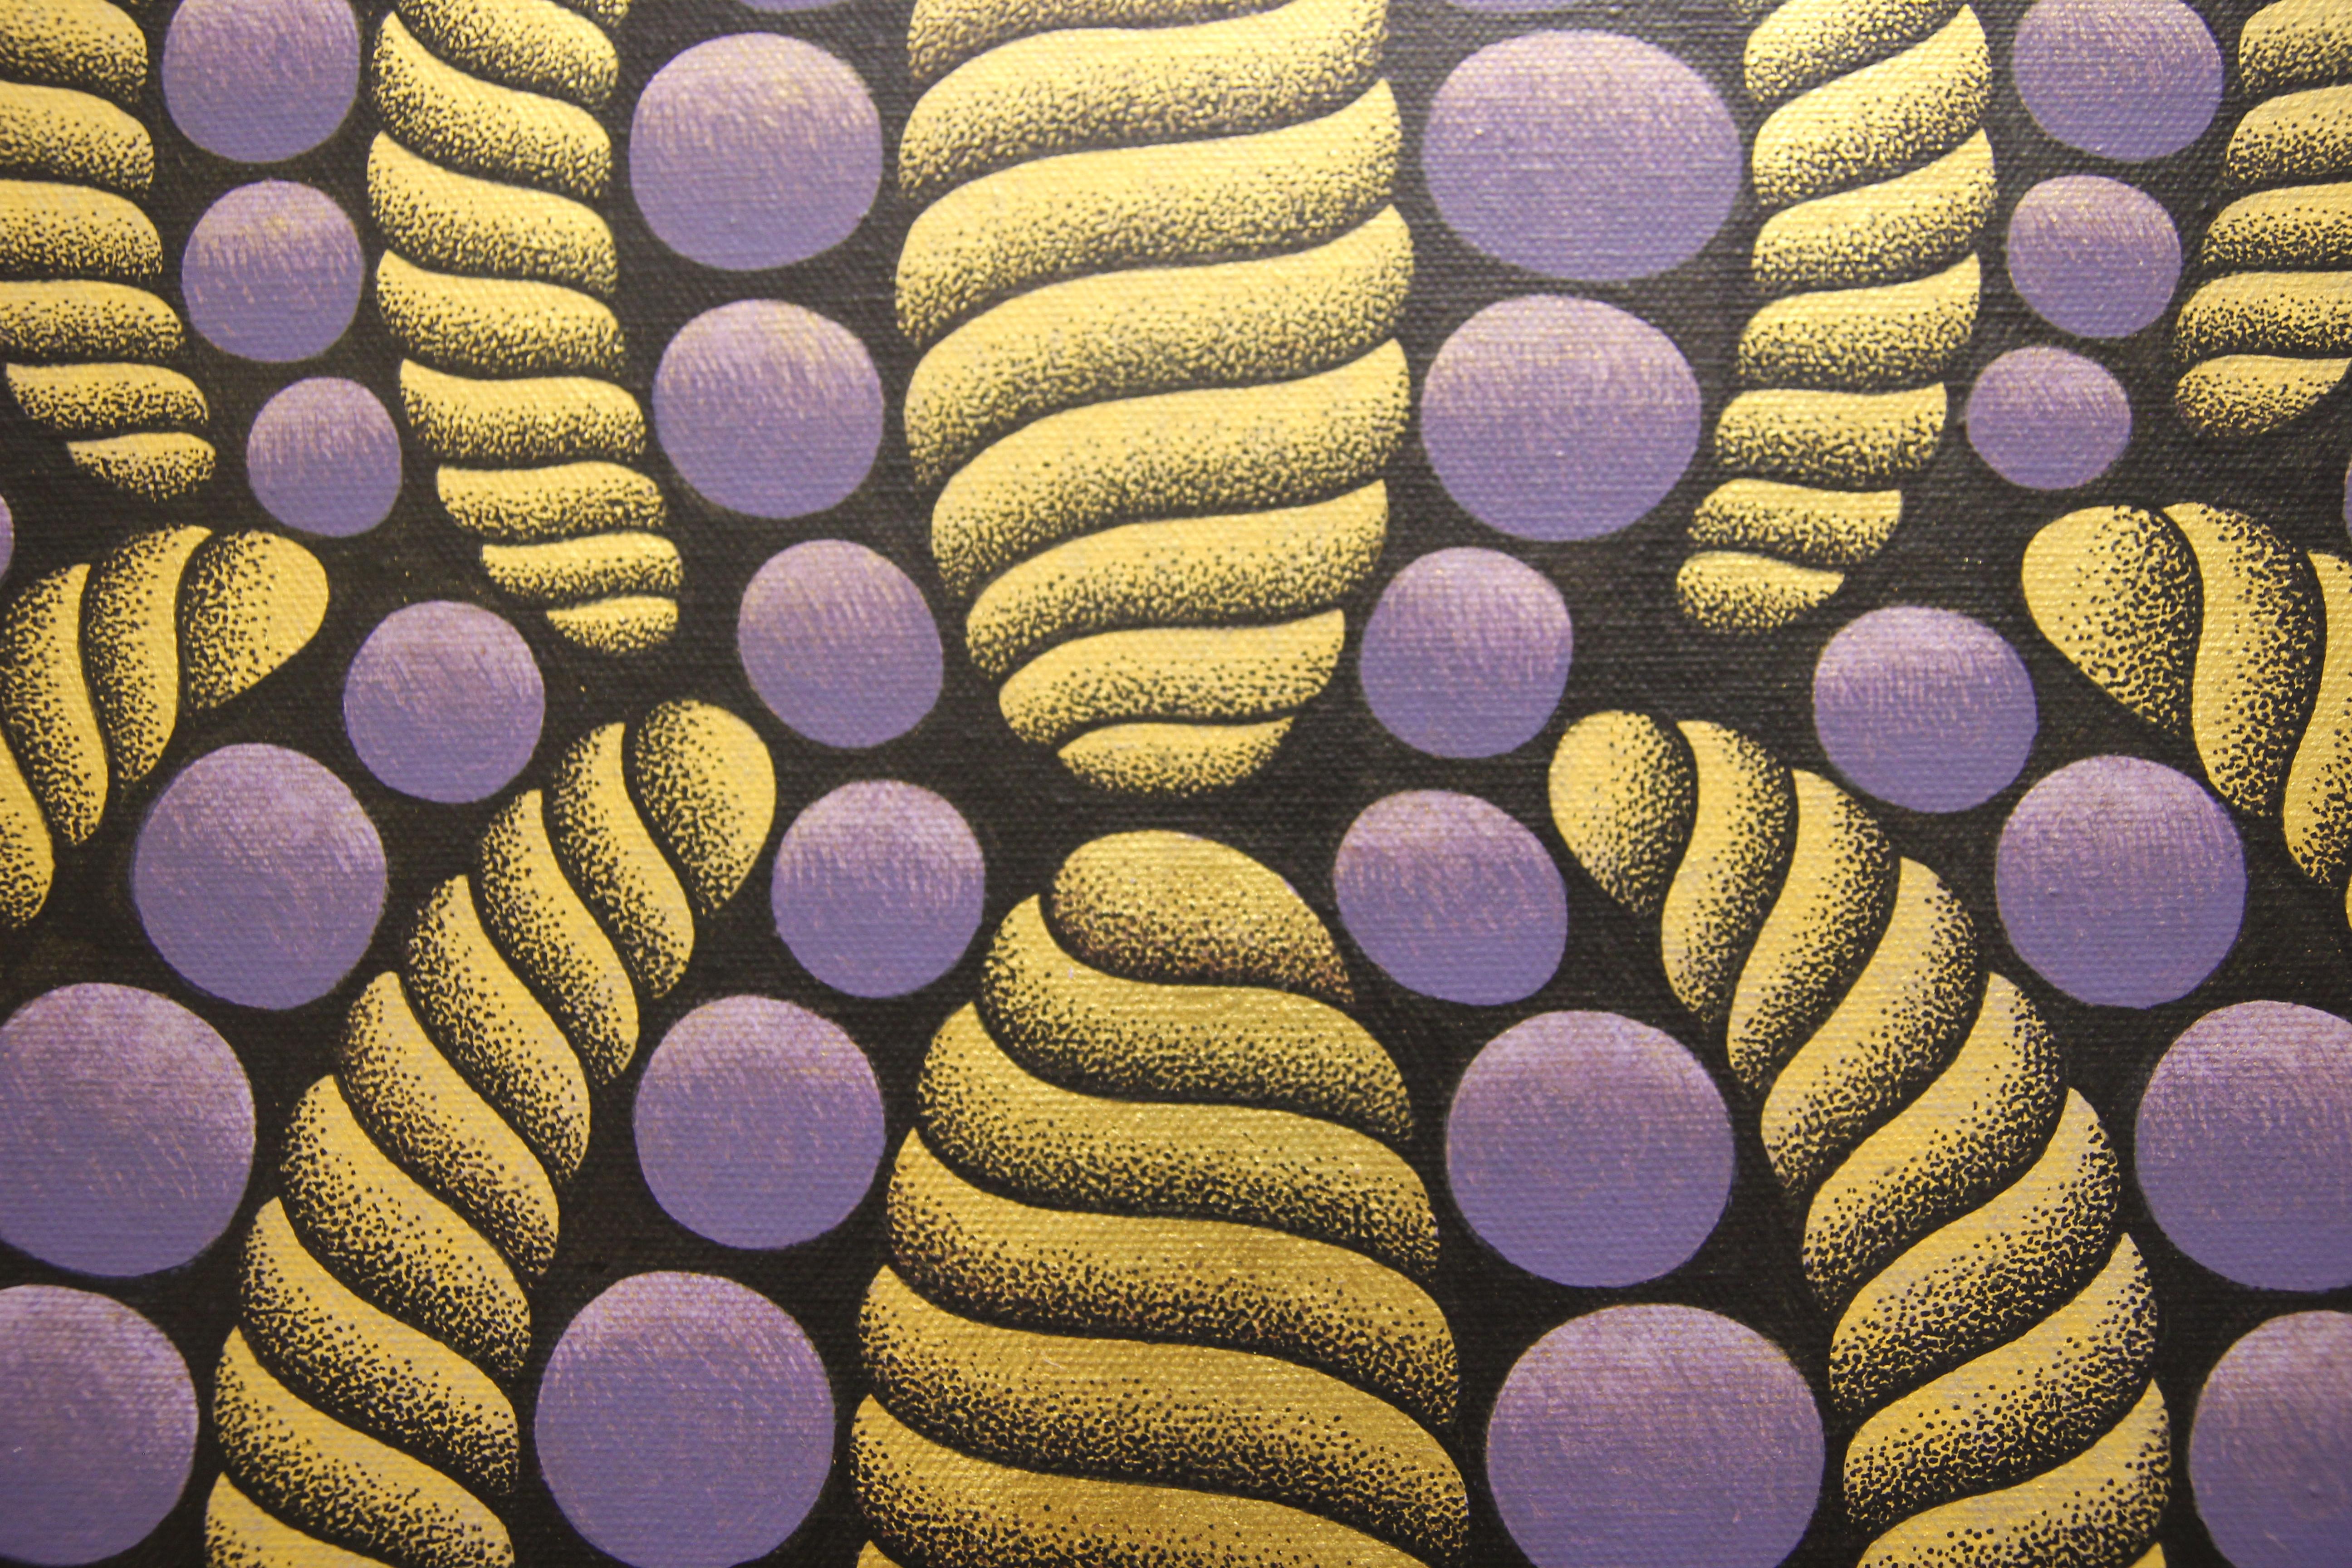 Abstract Geometric Op Art Painting by Thai artist Paramat Leung-On. Rich gold and purple circular shapes forming a mouth with an optical illusion pattern. Titled, signed, and dated by artist on the back. Framed in black matte frame.

Dimensions